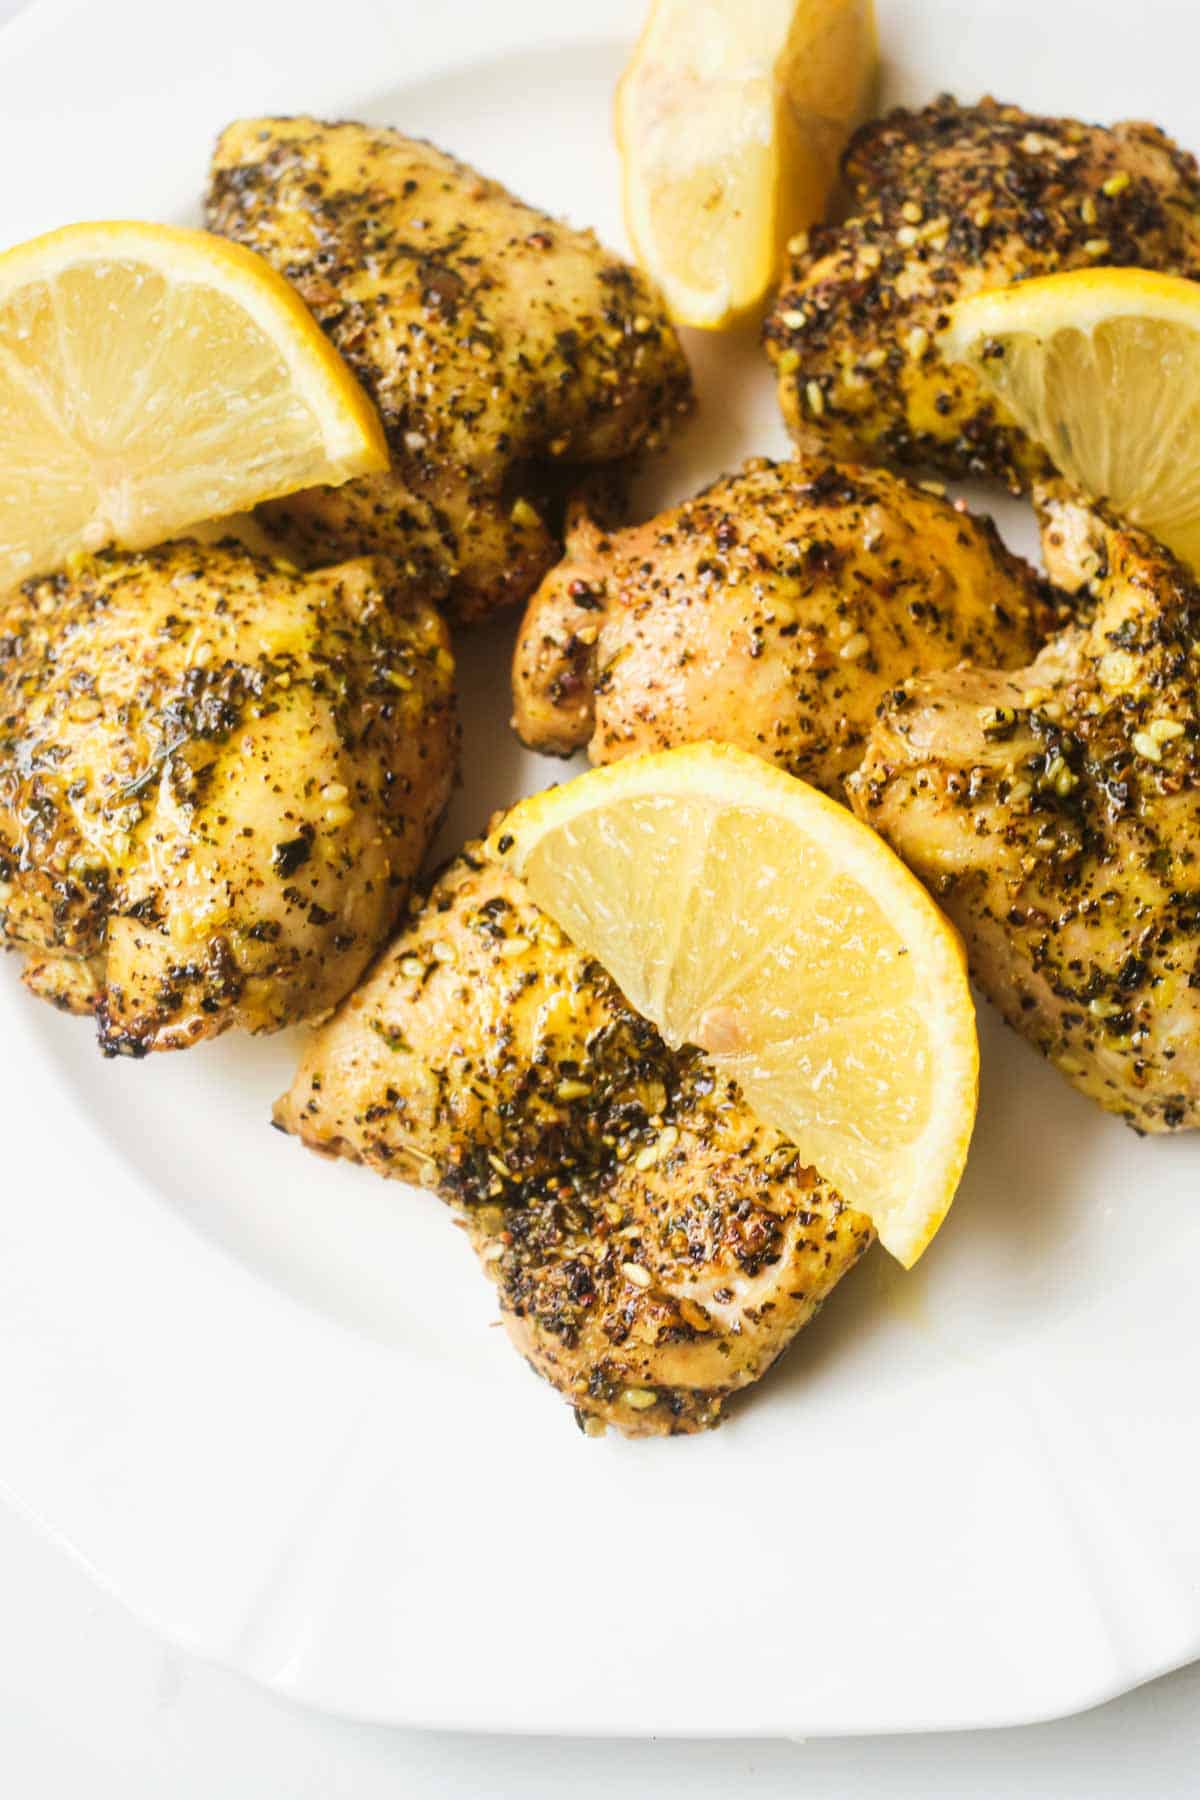 the completed baked lemon pepper chicken thighs recipe